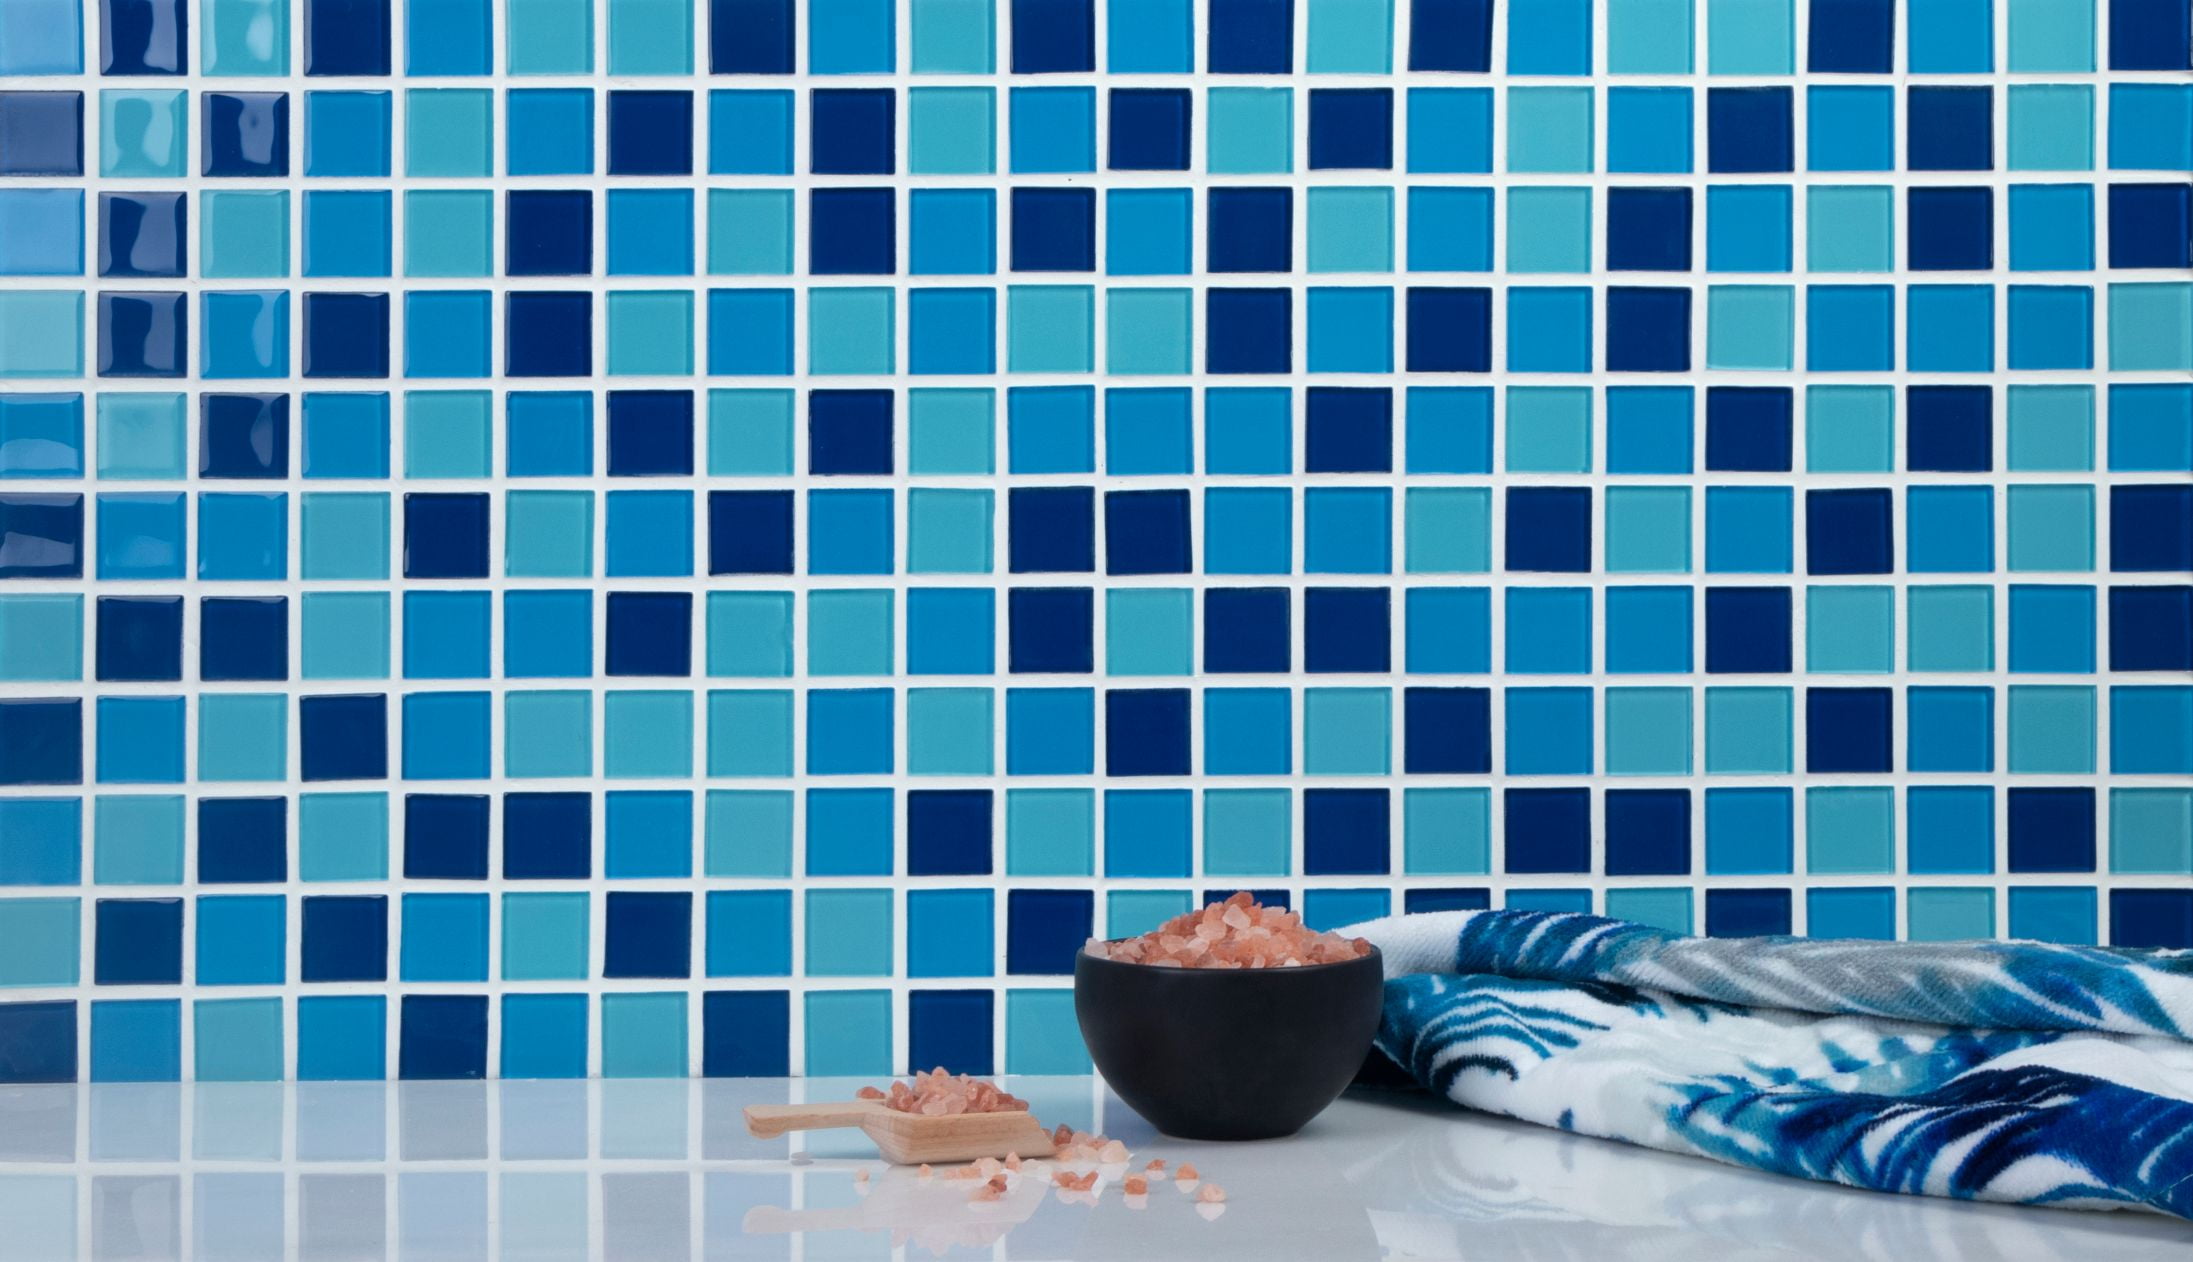 WS Tiles - Crystals Aqua 12 in. x 12 in. Square Glass Mosaic Wall Tile (22  sq. ft / Case)